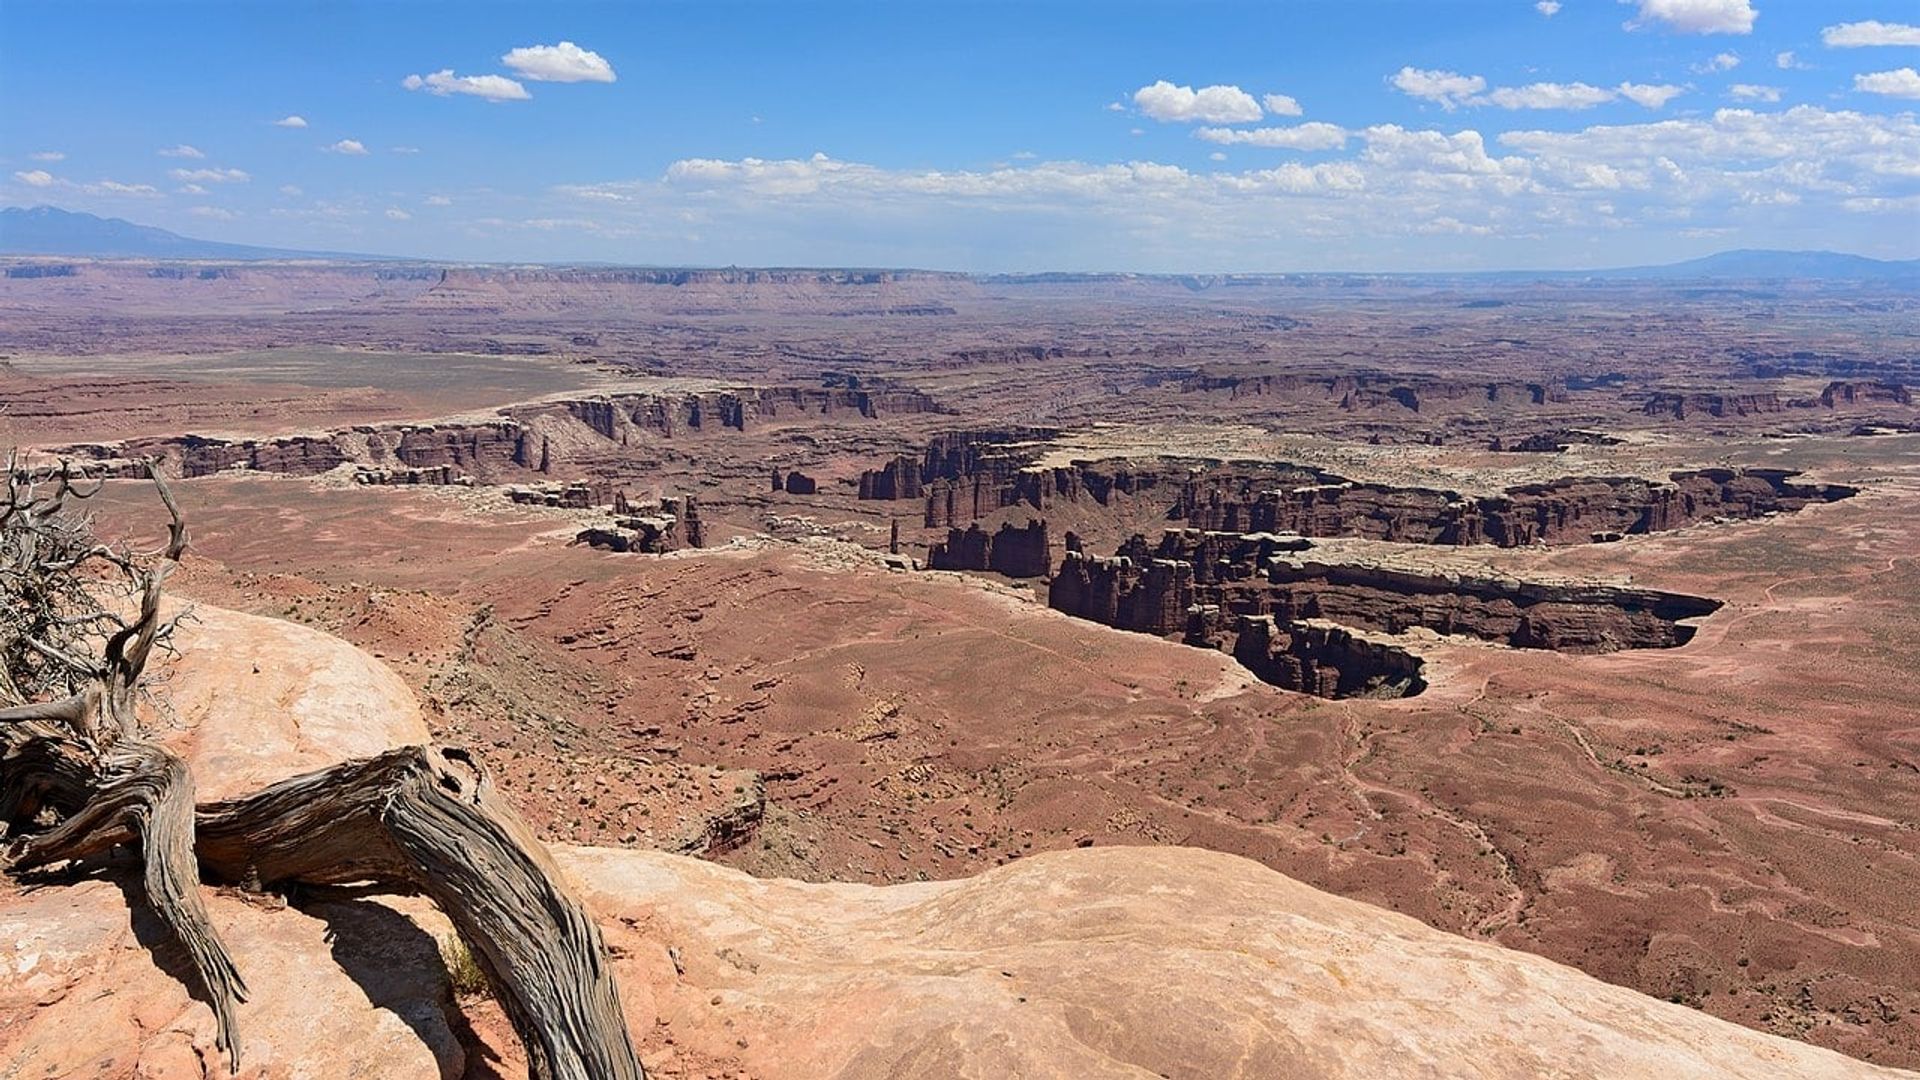 The Canyonlands background